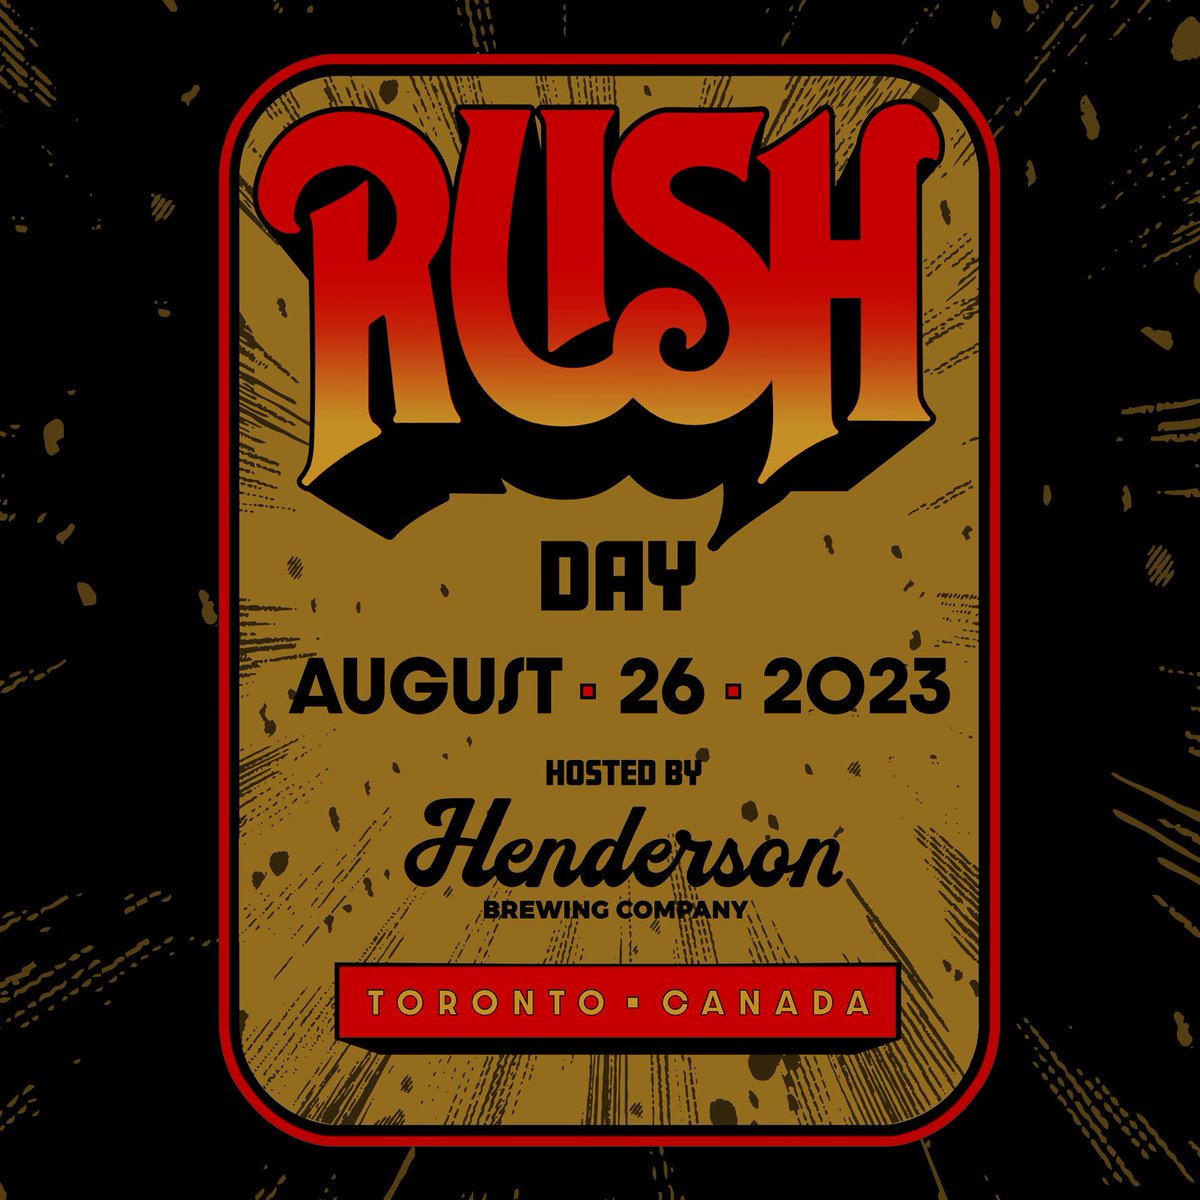 Henderson Brewing is proud to announce the first-ever Rush Day, Sat Aug 26, 2023! Entry is free but ticket holders get a free door prize and have exclusive access to buy a limited edition Rush Day Growler! Tickets & More Info: bit.ly/RushDay2023 @rushtheband @RushBeerHQ